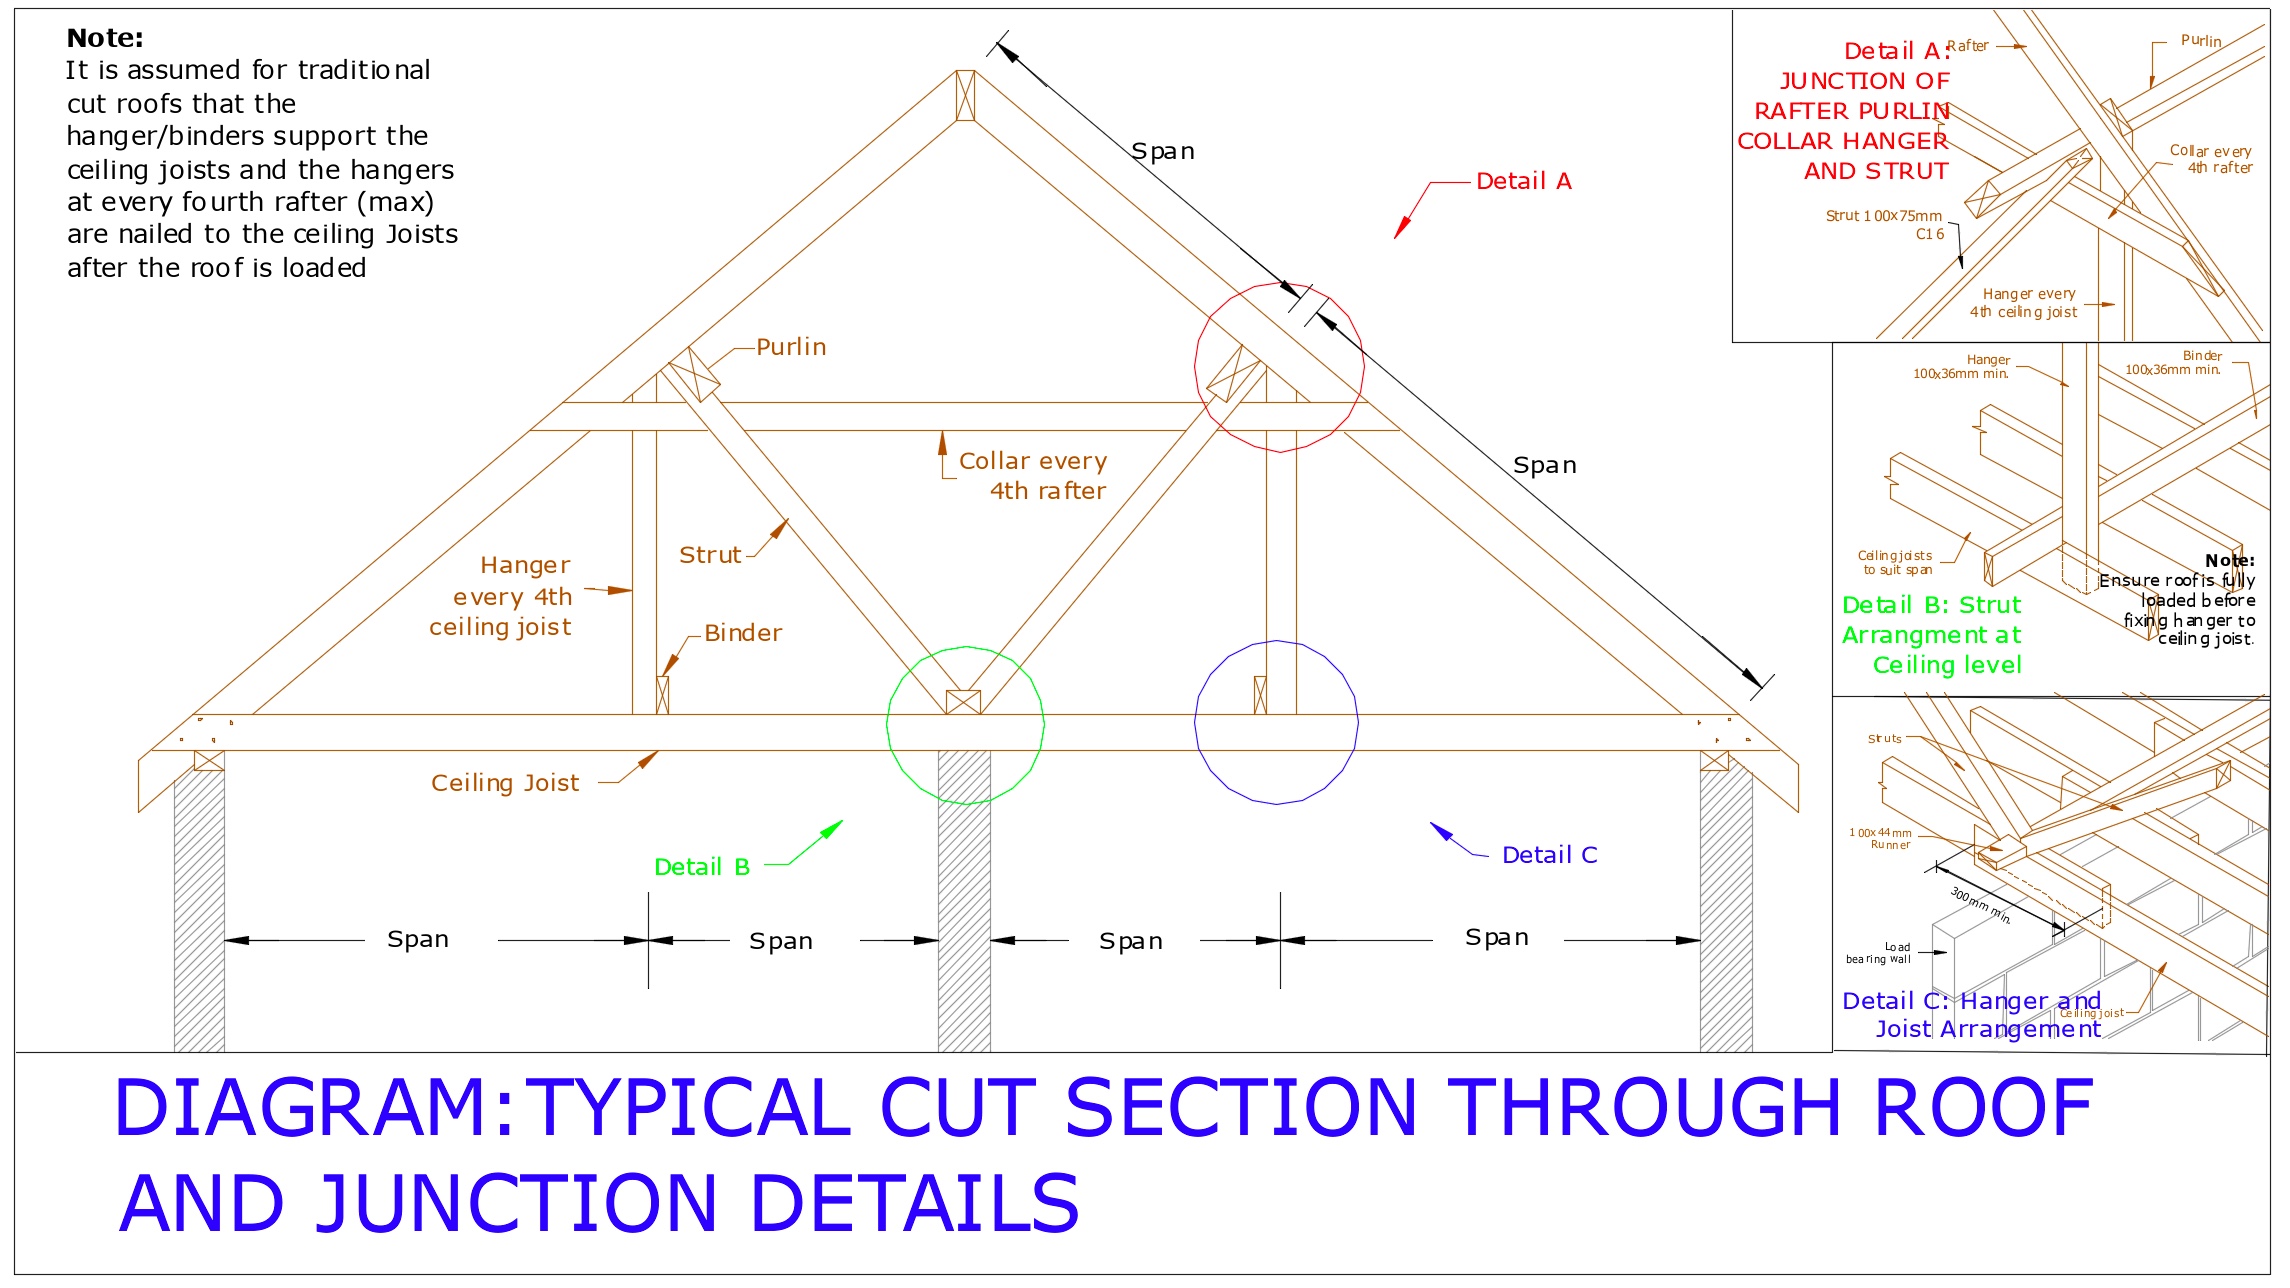 Diagram D78 - Typical cut roof and junction details